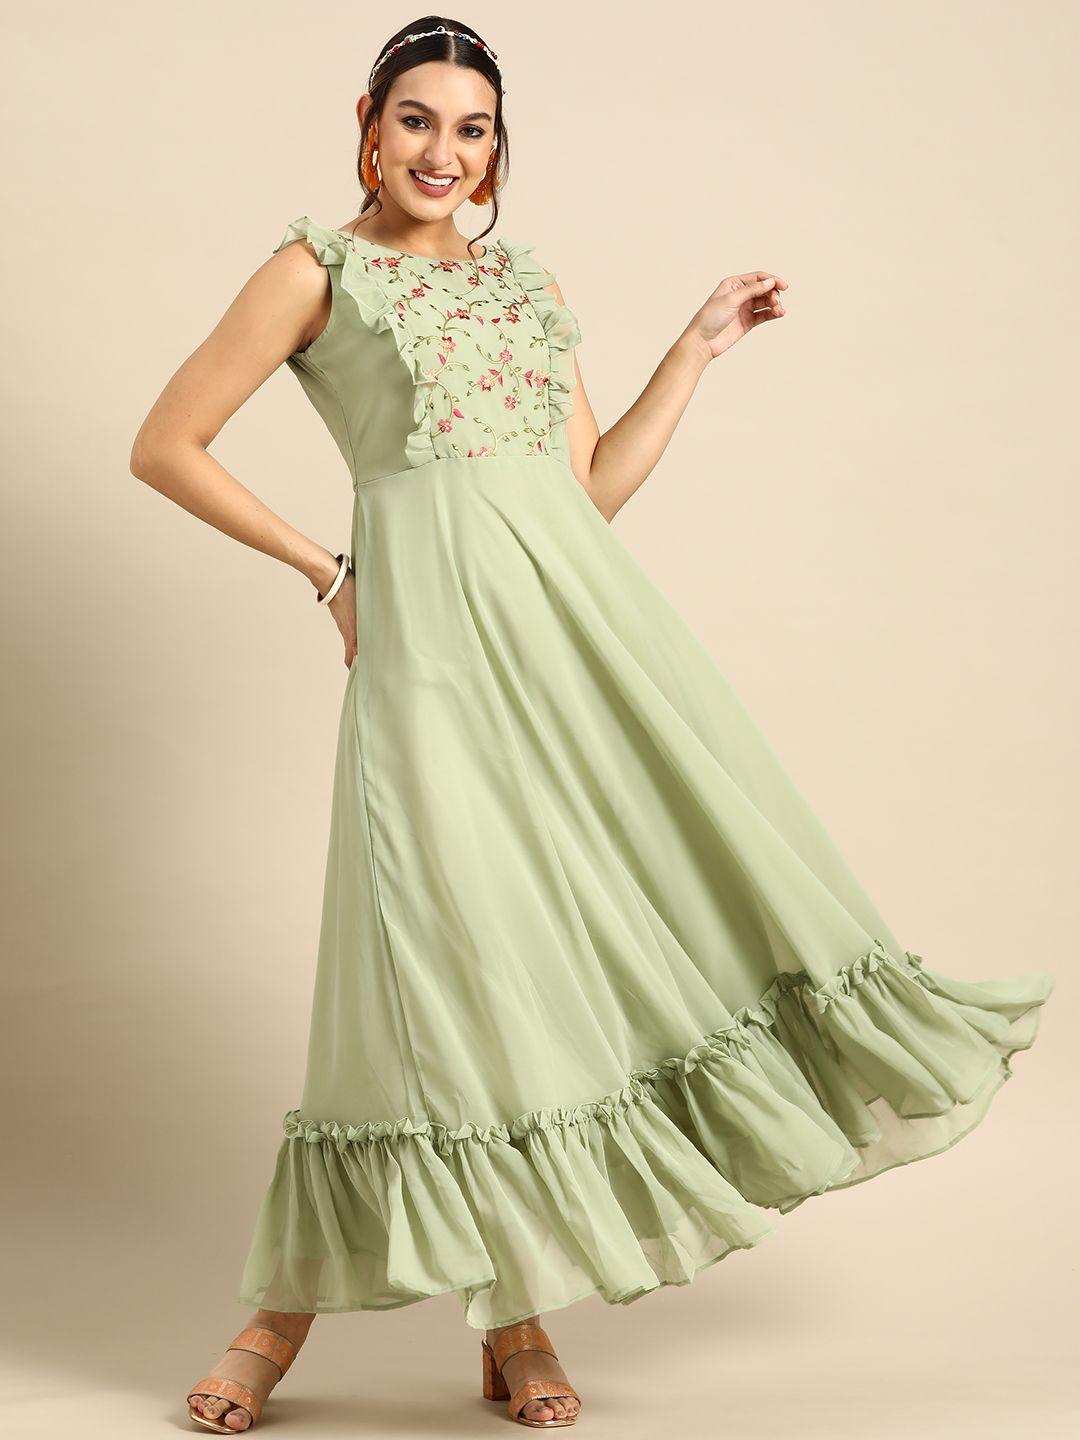 sangria floral embroidered ruffled georgette maxi dress